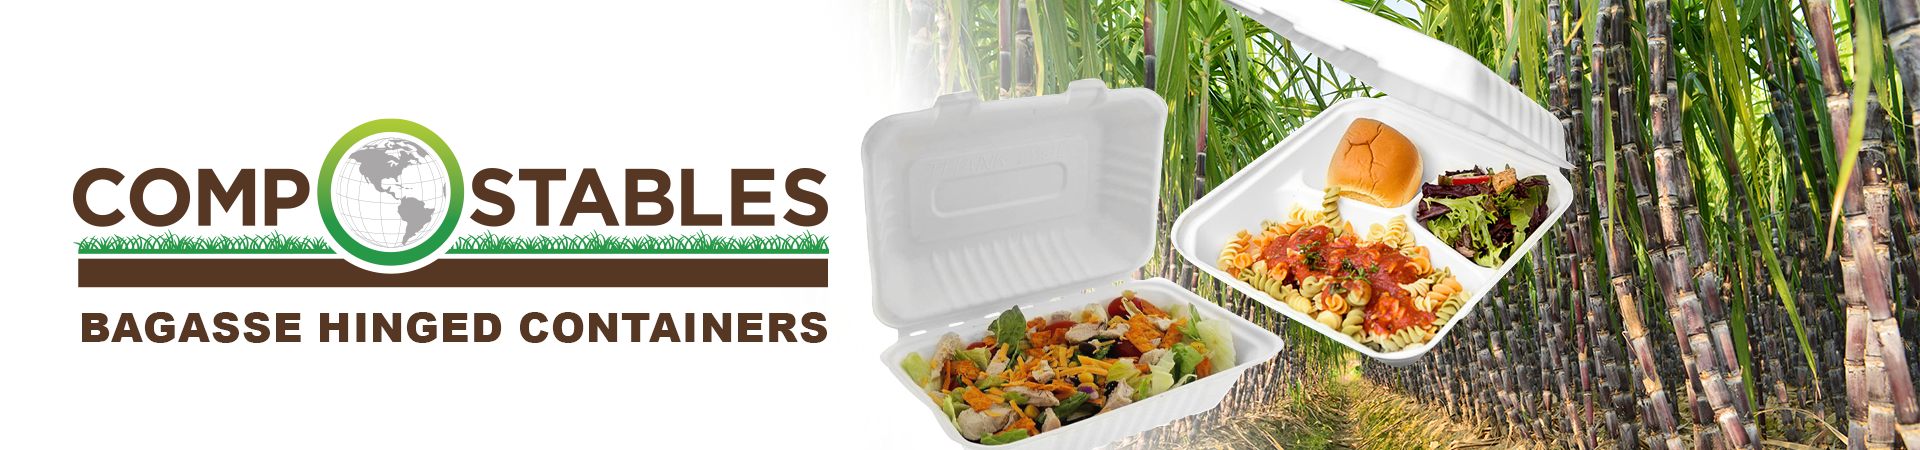 Bagasse Hinged Containers